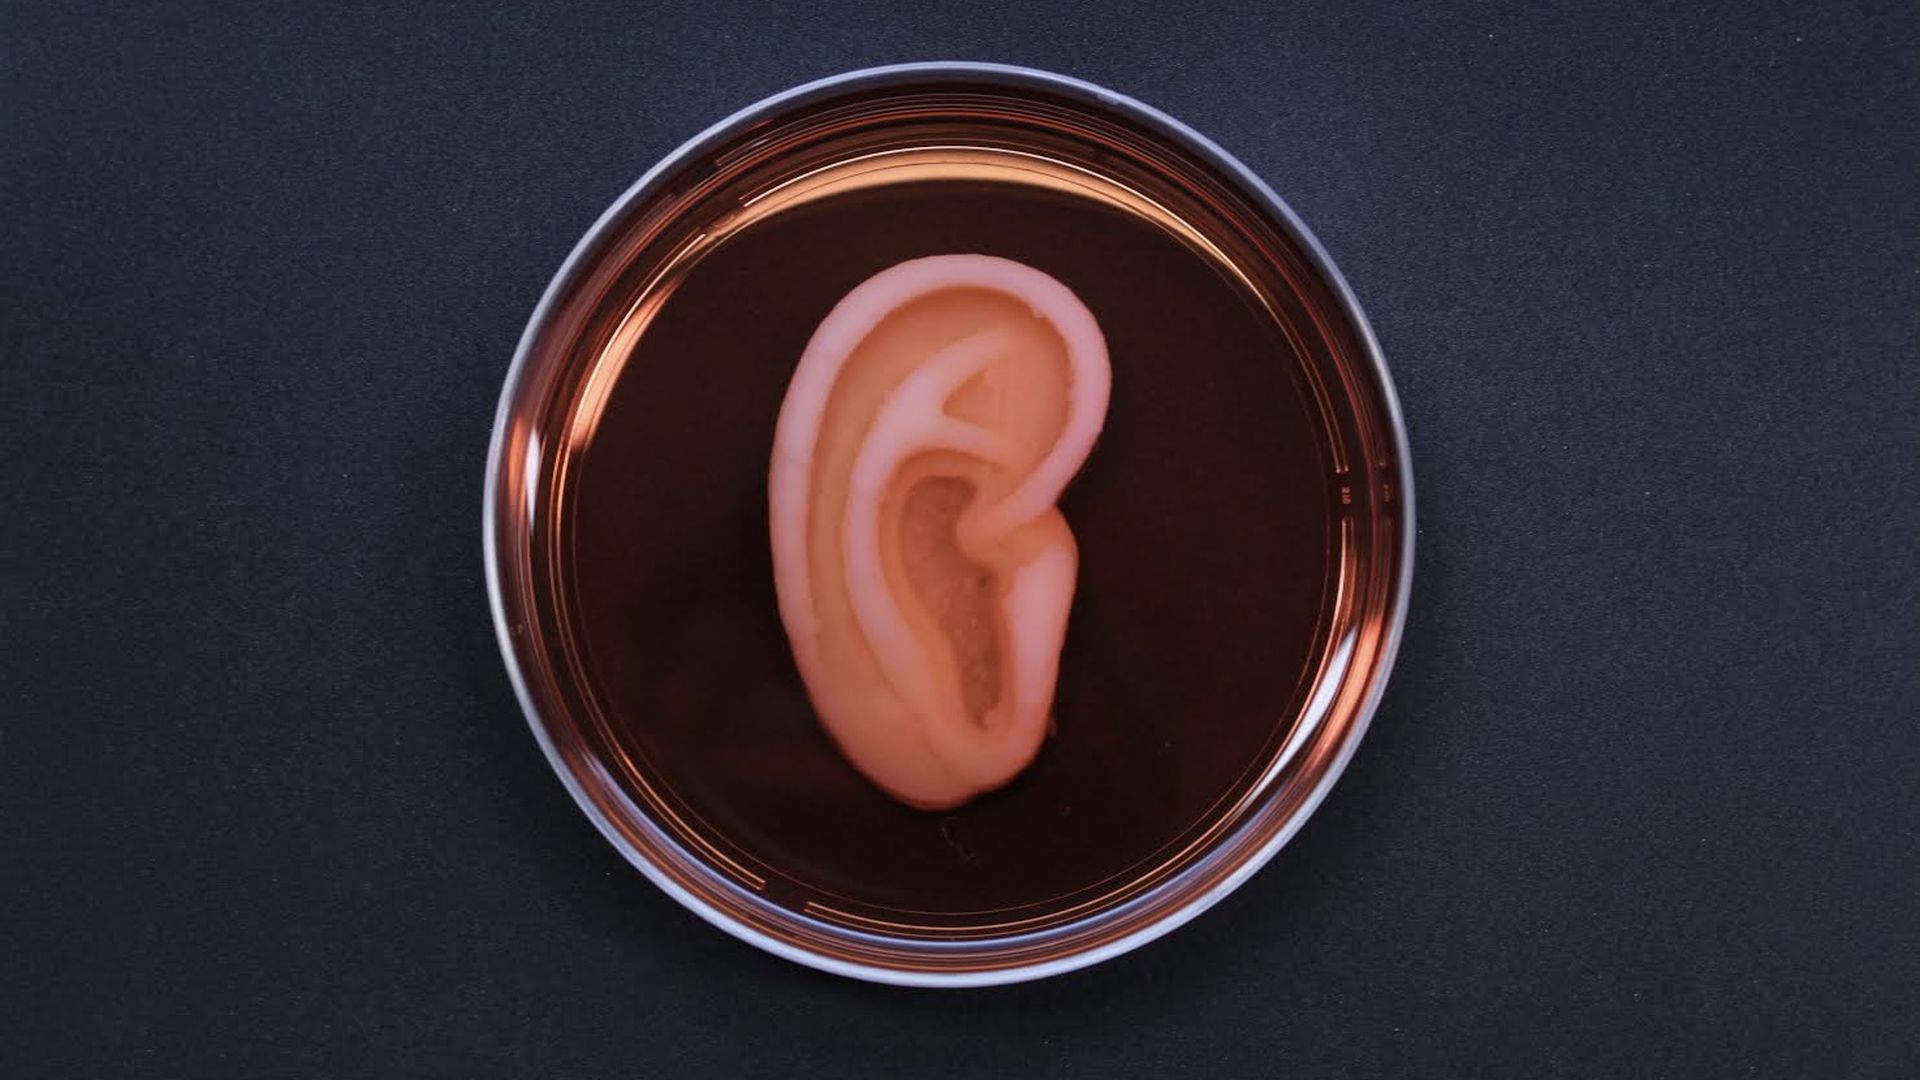 Image of a 3D printed ear cartilage replacement